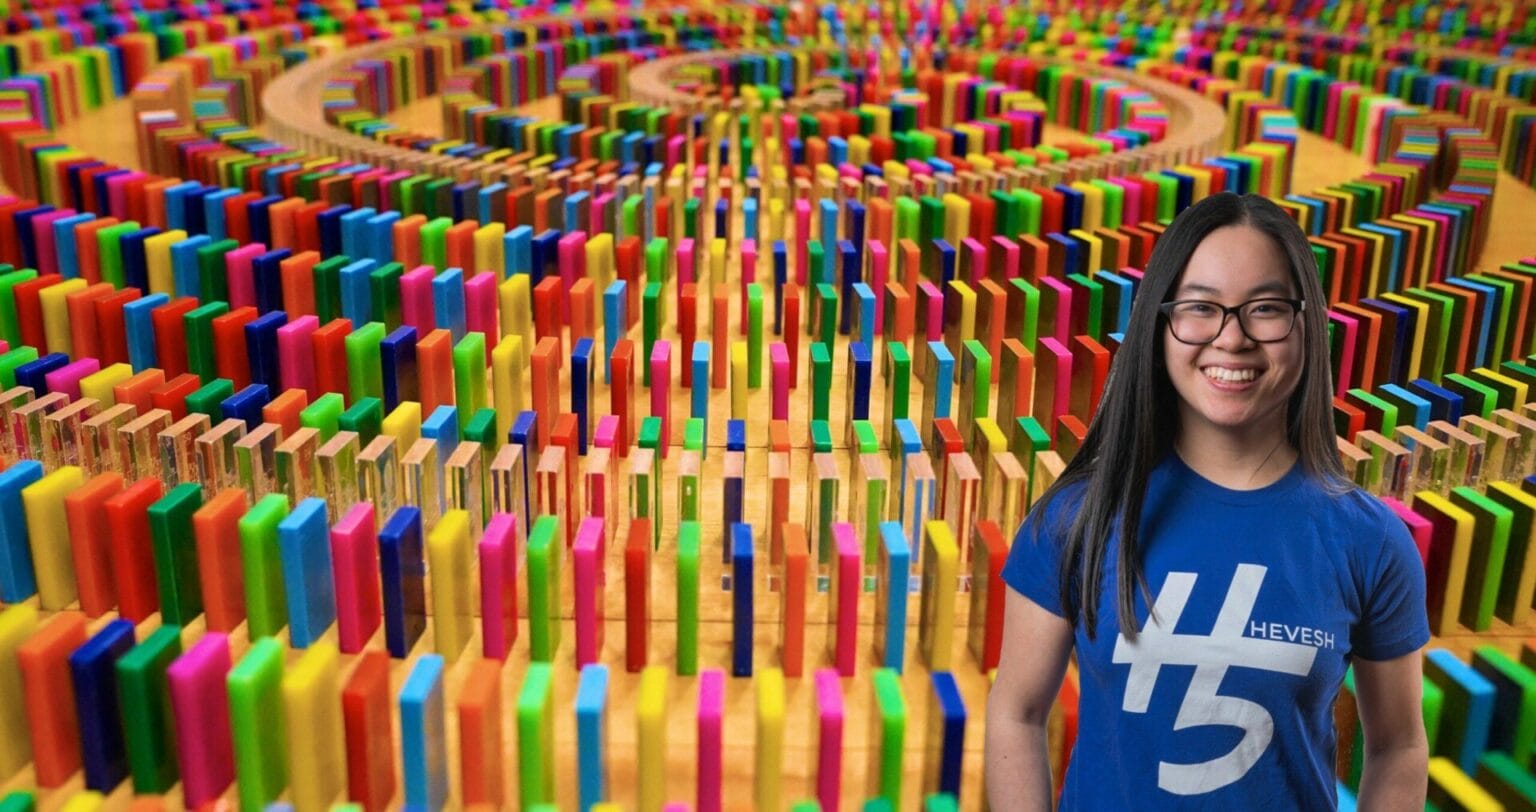 Domino artist and YouTube influencer Lily Hevesh (@Hevesh5) with her latest creation. Launched to support the call for fairer vaccine distribution worldwide, in collaboration with global charitable foundation Wellcome and partners UNICEF and GAVI. Watch the dominoes topple at https://www.youtube.com/watch?v=ugbX9uF6-x0